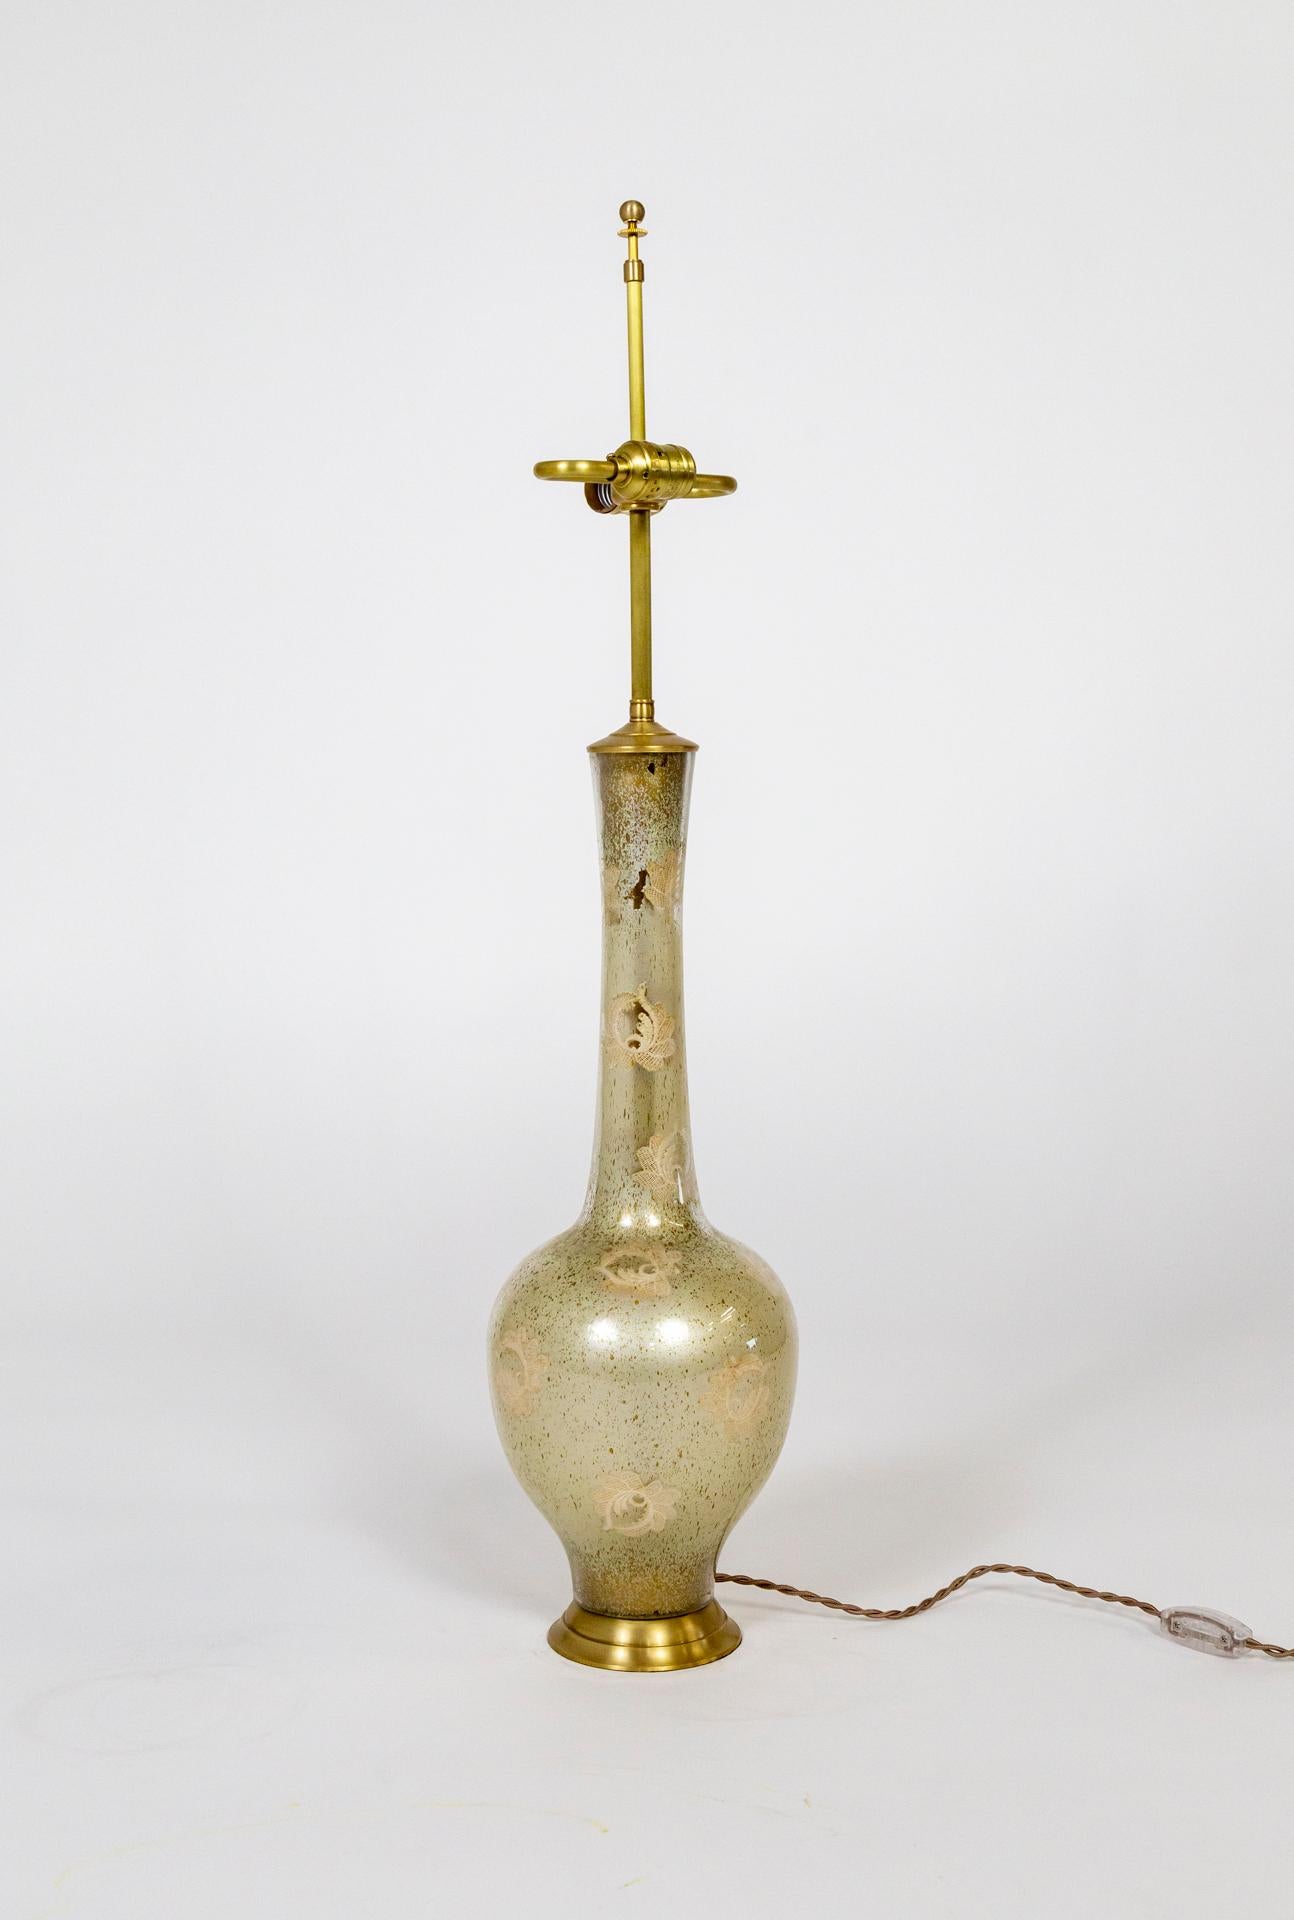 A tall, long neck amphora shape lamp made of double-walled, gold-flecked, pearl glass with pale pink lace flowers throughout. This refurbished, vintage, Italian gem from the late 20th century has a brass base, cap, ball finial, and narrow,